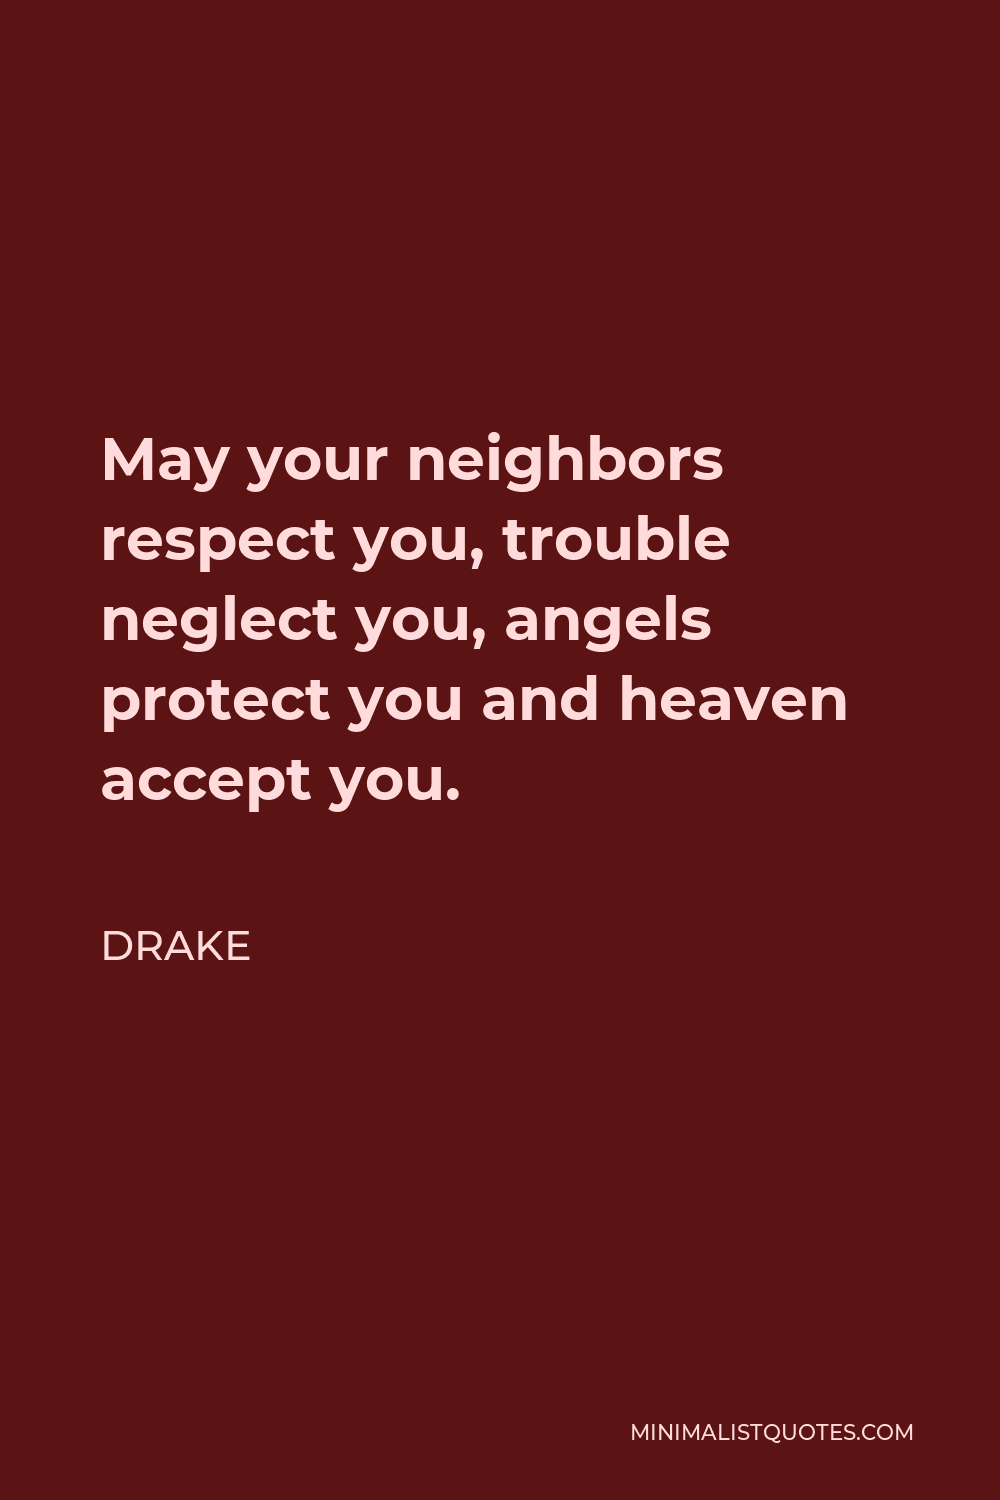 Drake Quote - May your neighbors respect you, trouble neglect you, angels protect you and heaven accept you.